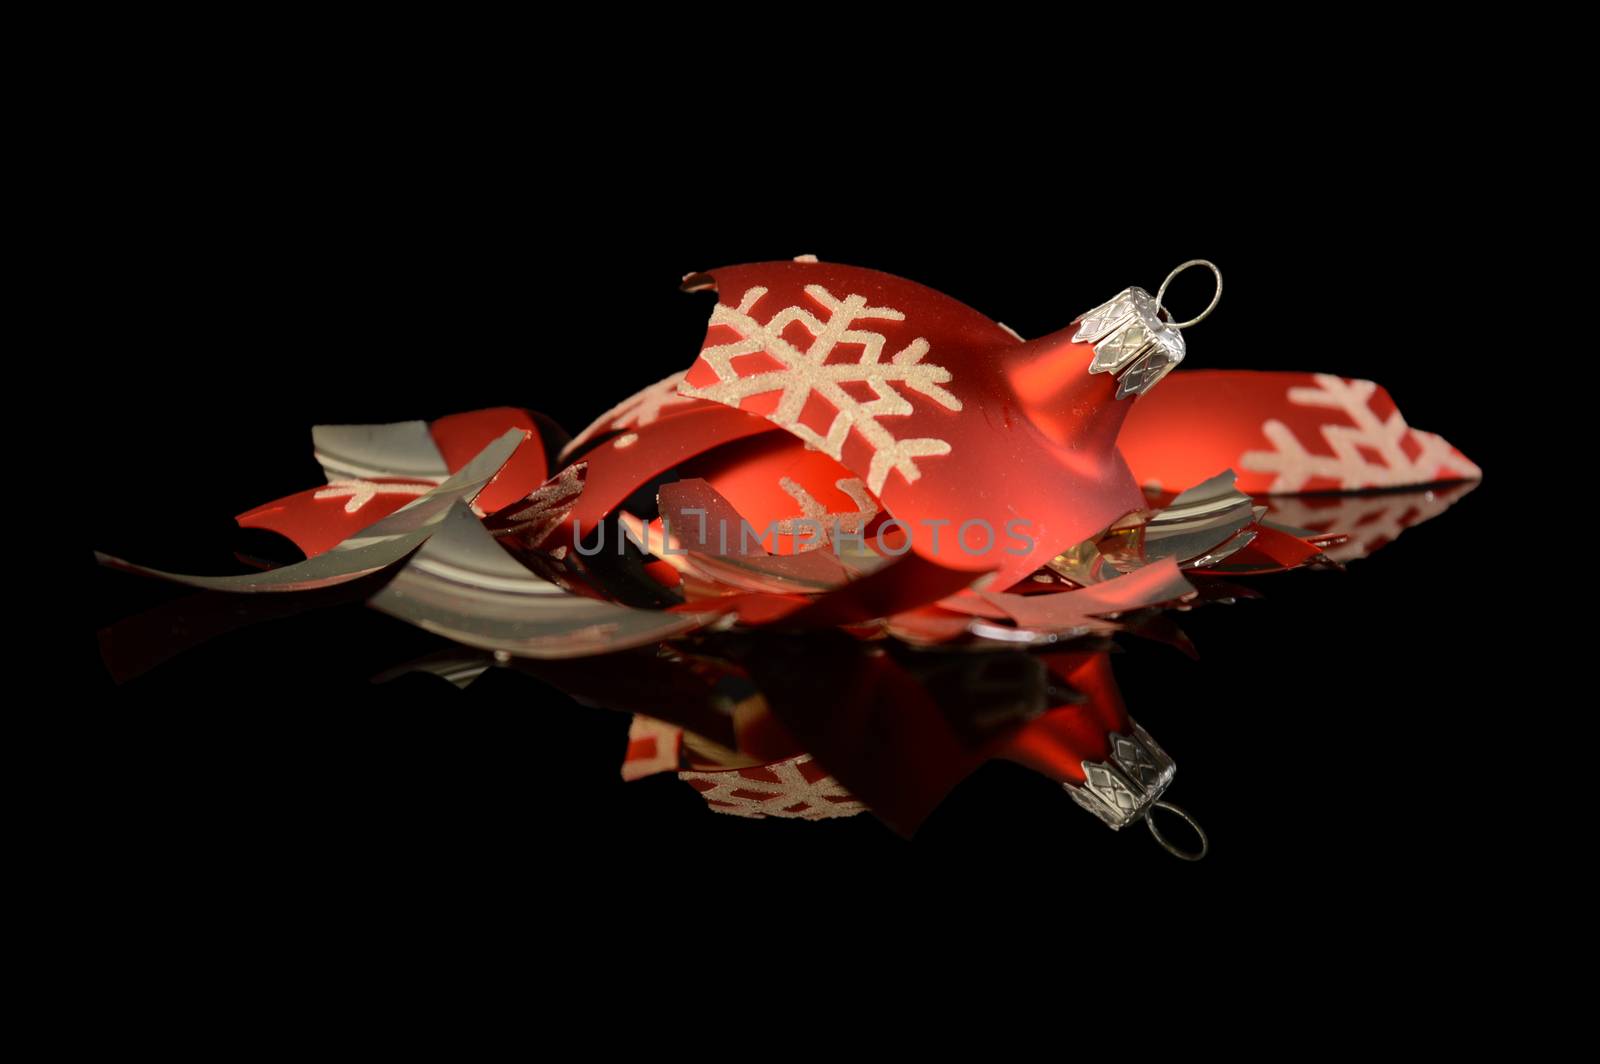 Broken Christmas Bauble by AlphaBaby